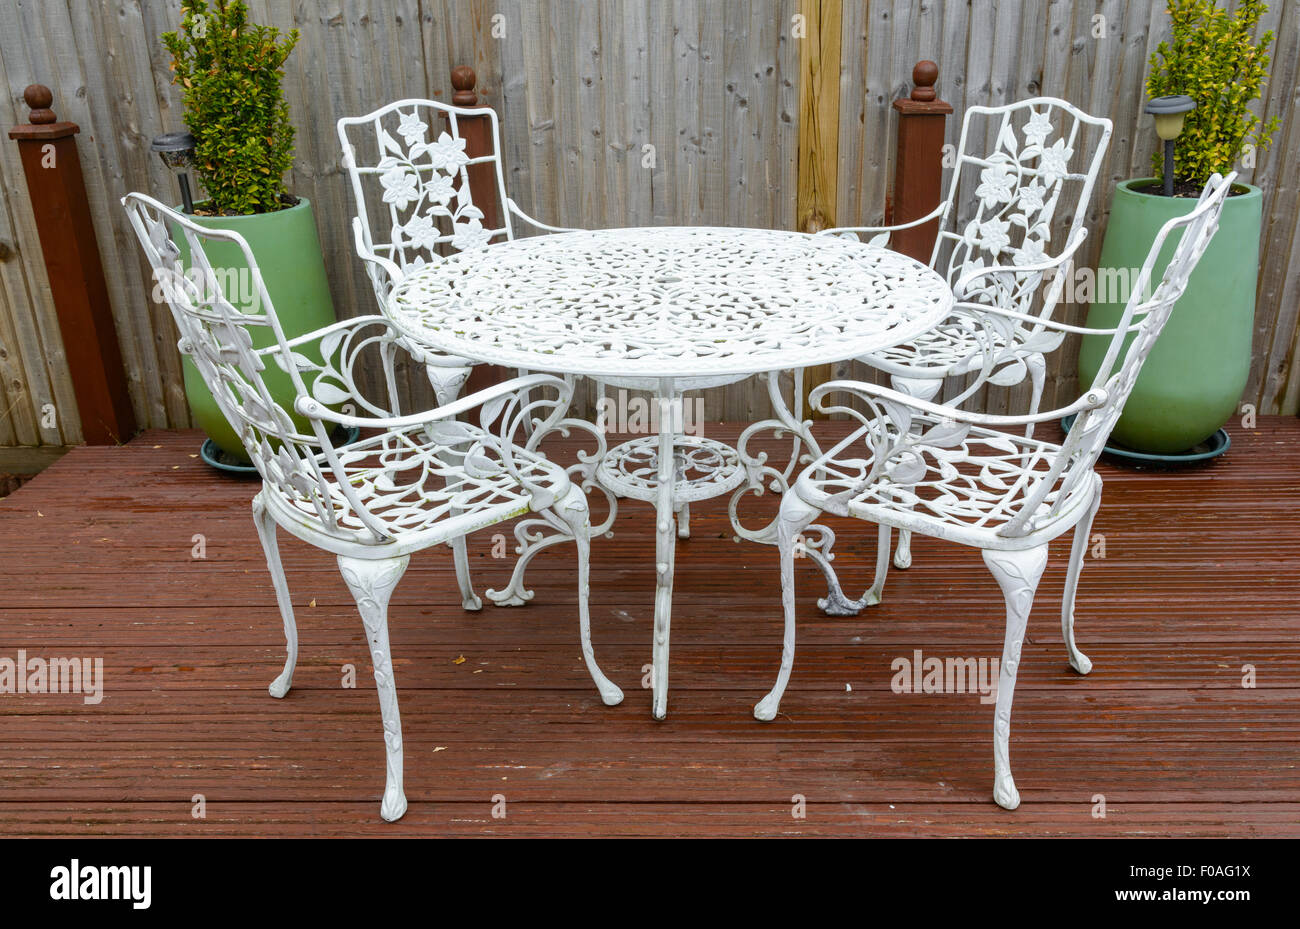 White Cast Iron Garden Table And Chairs In A Back Garden Stock